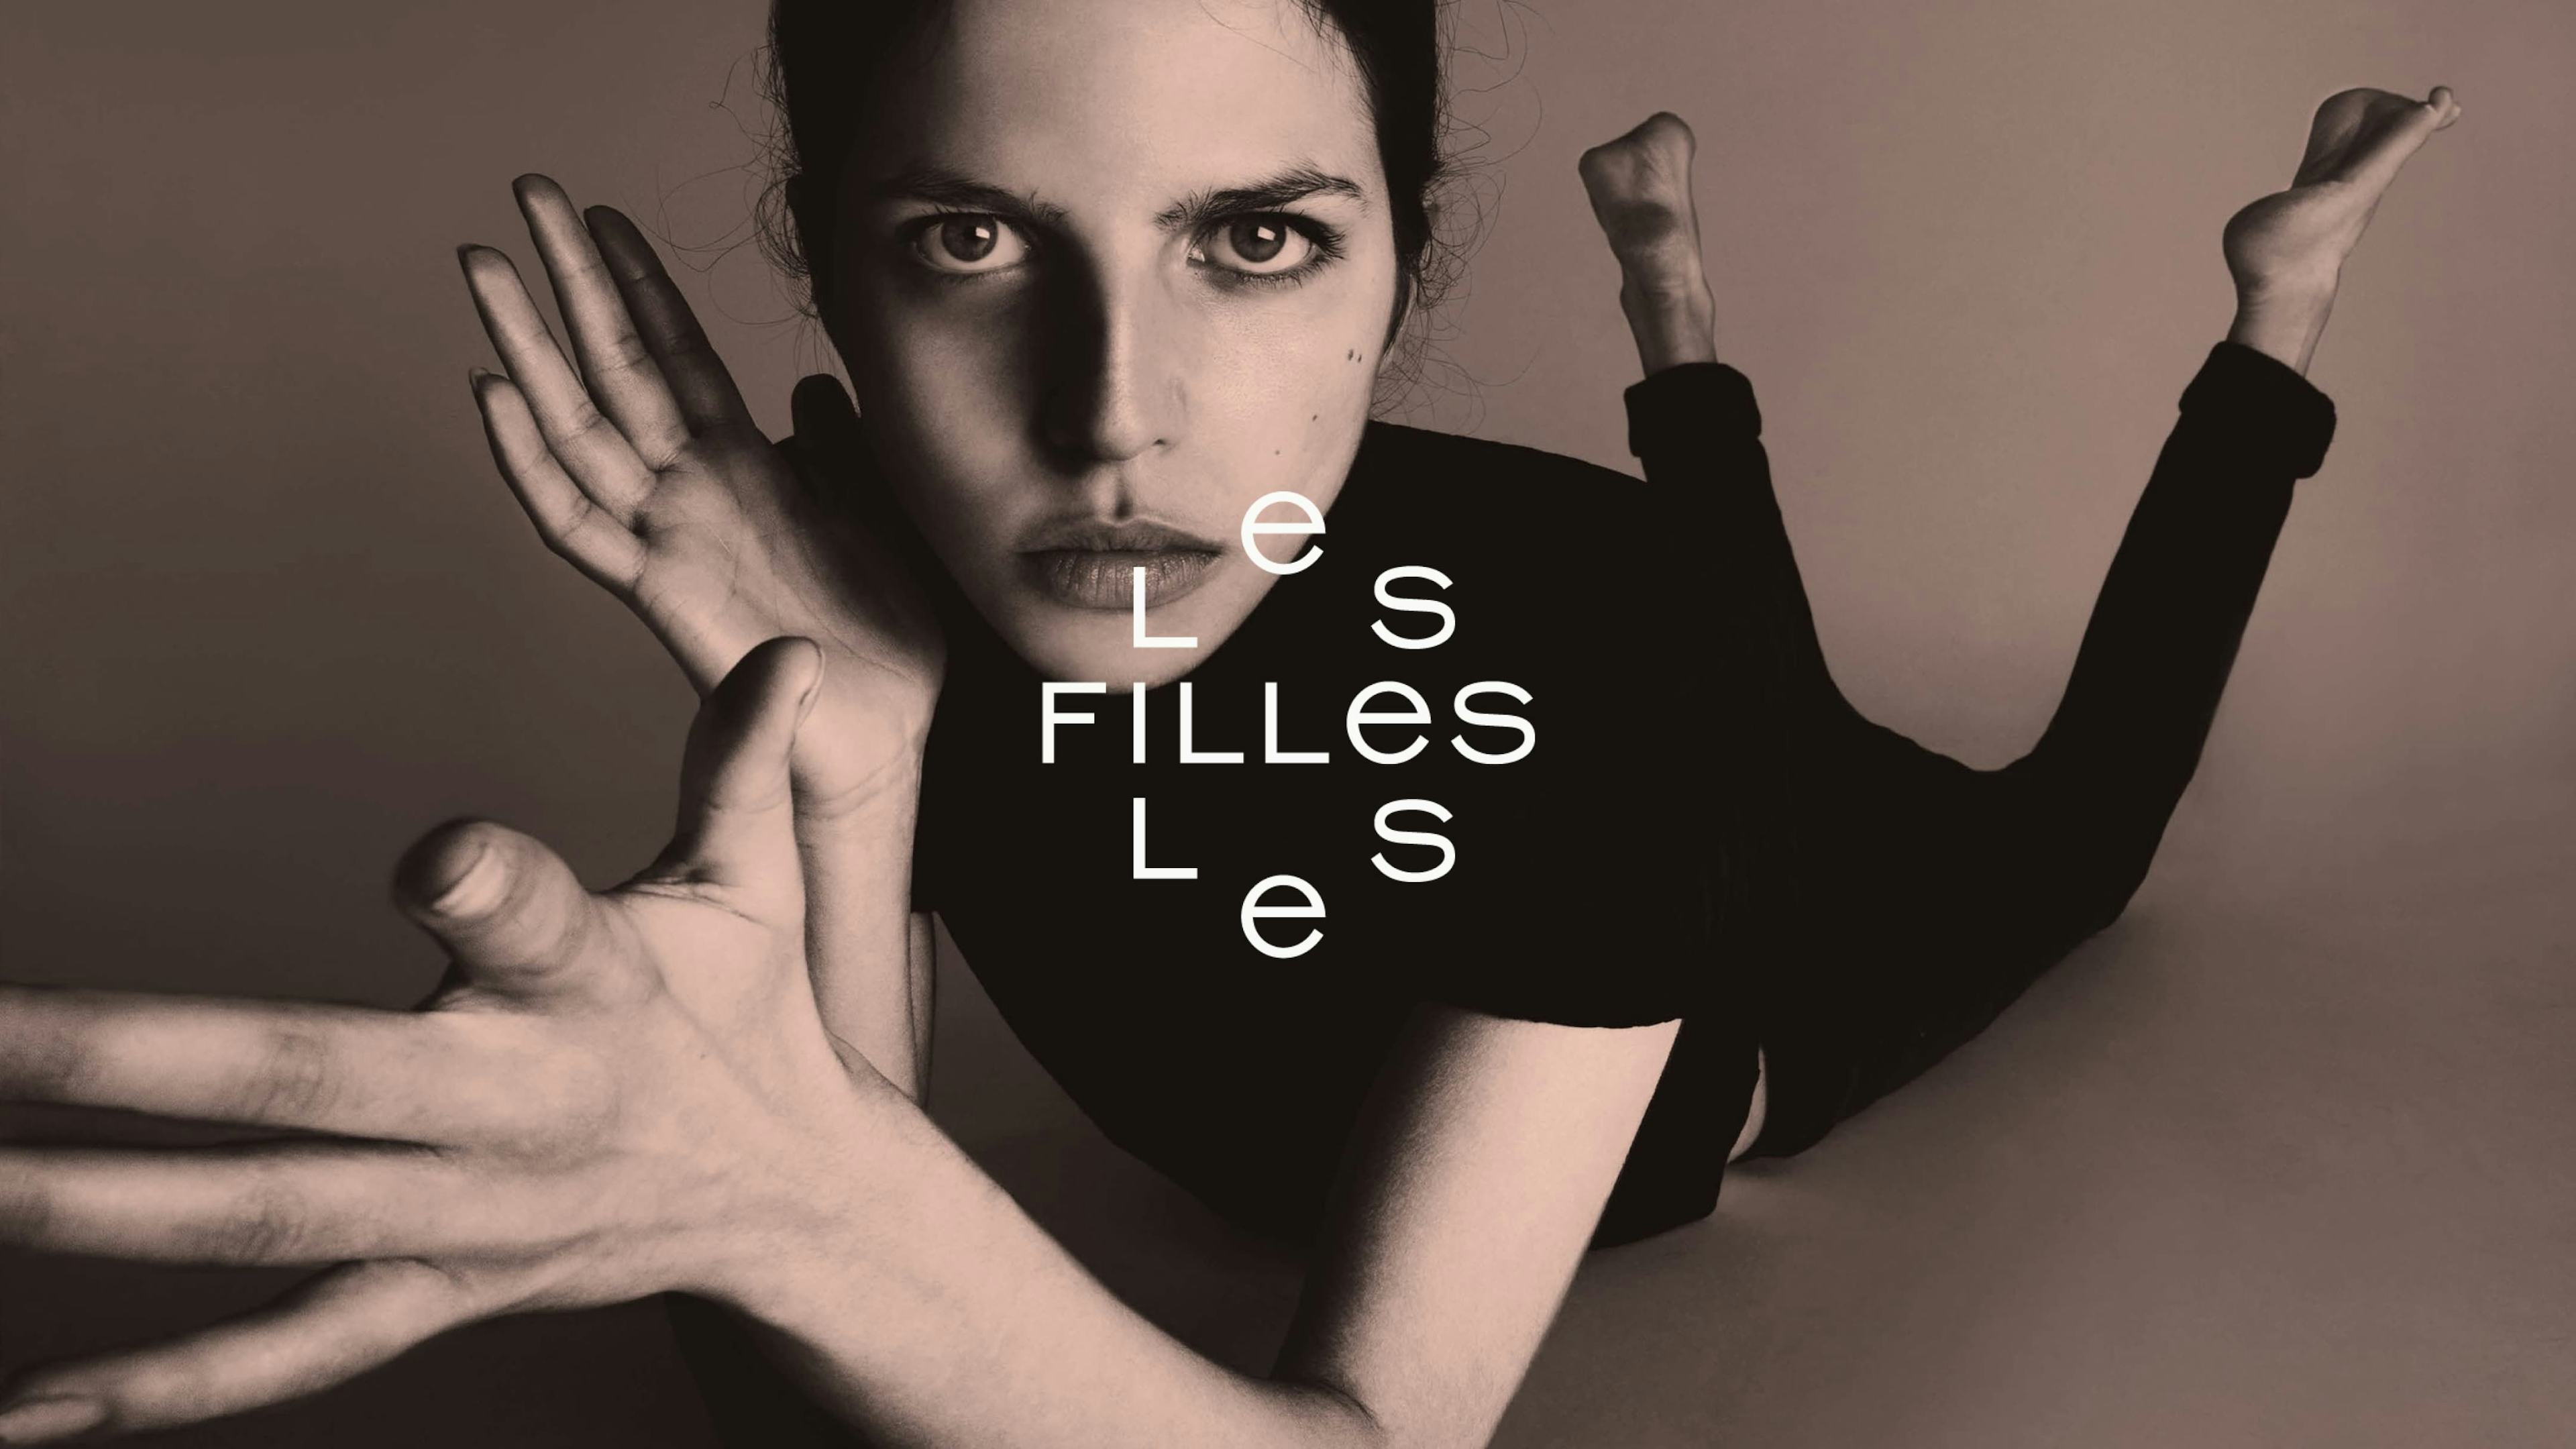 Brand identity, typography, responsive design, and development for Les Filles, a global talent agency that represents female-identifying musicians.